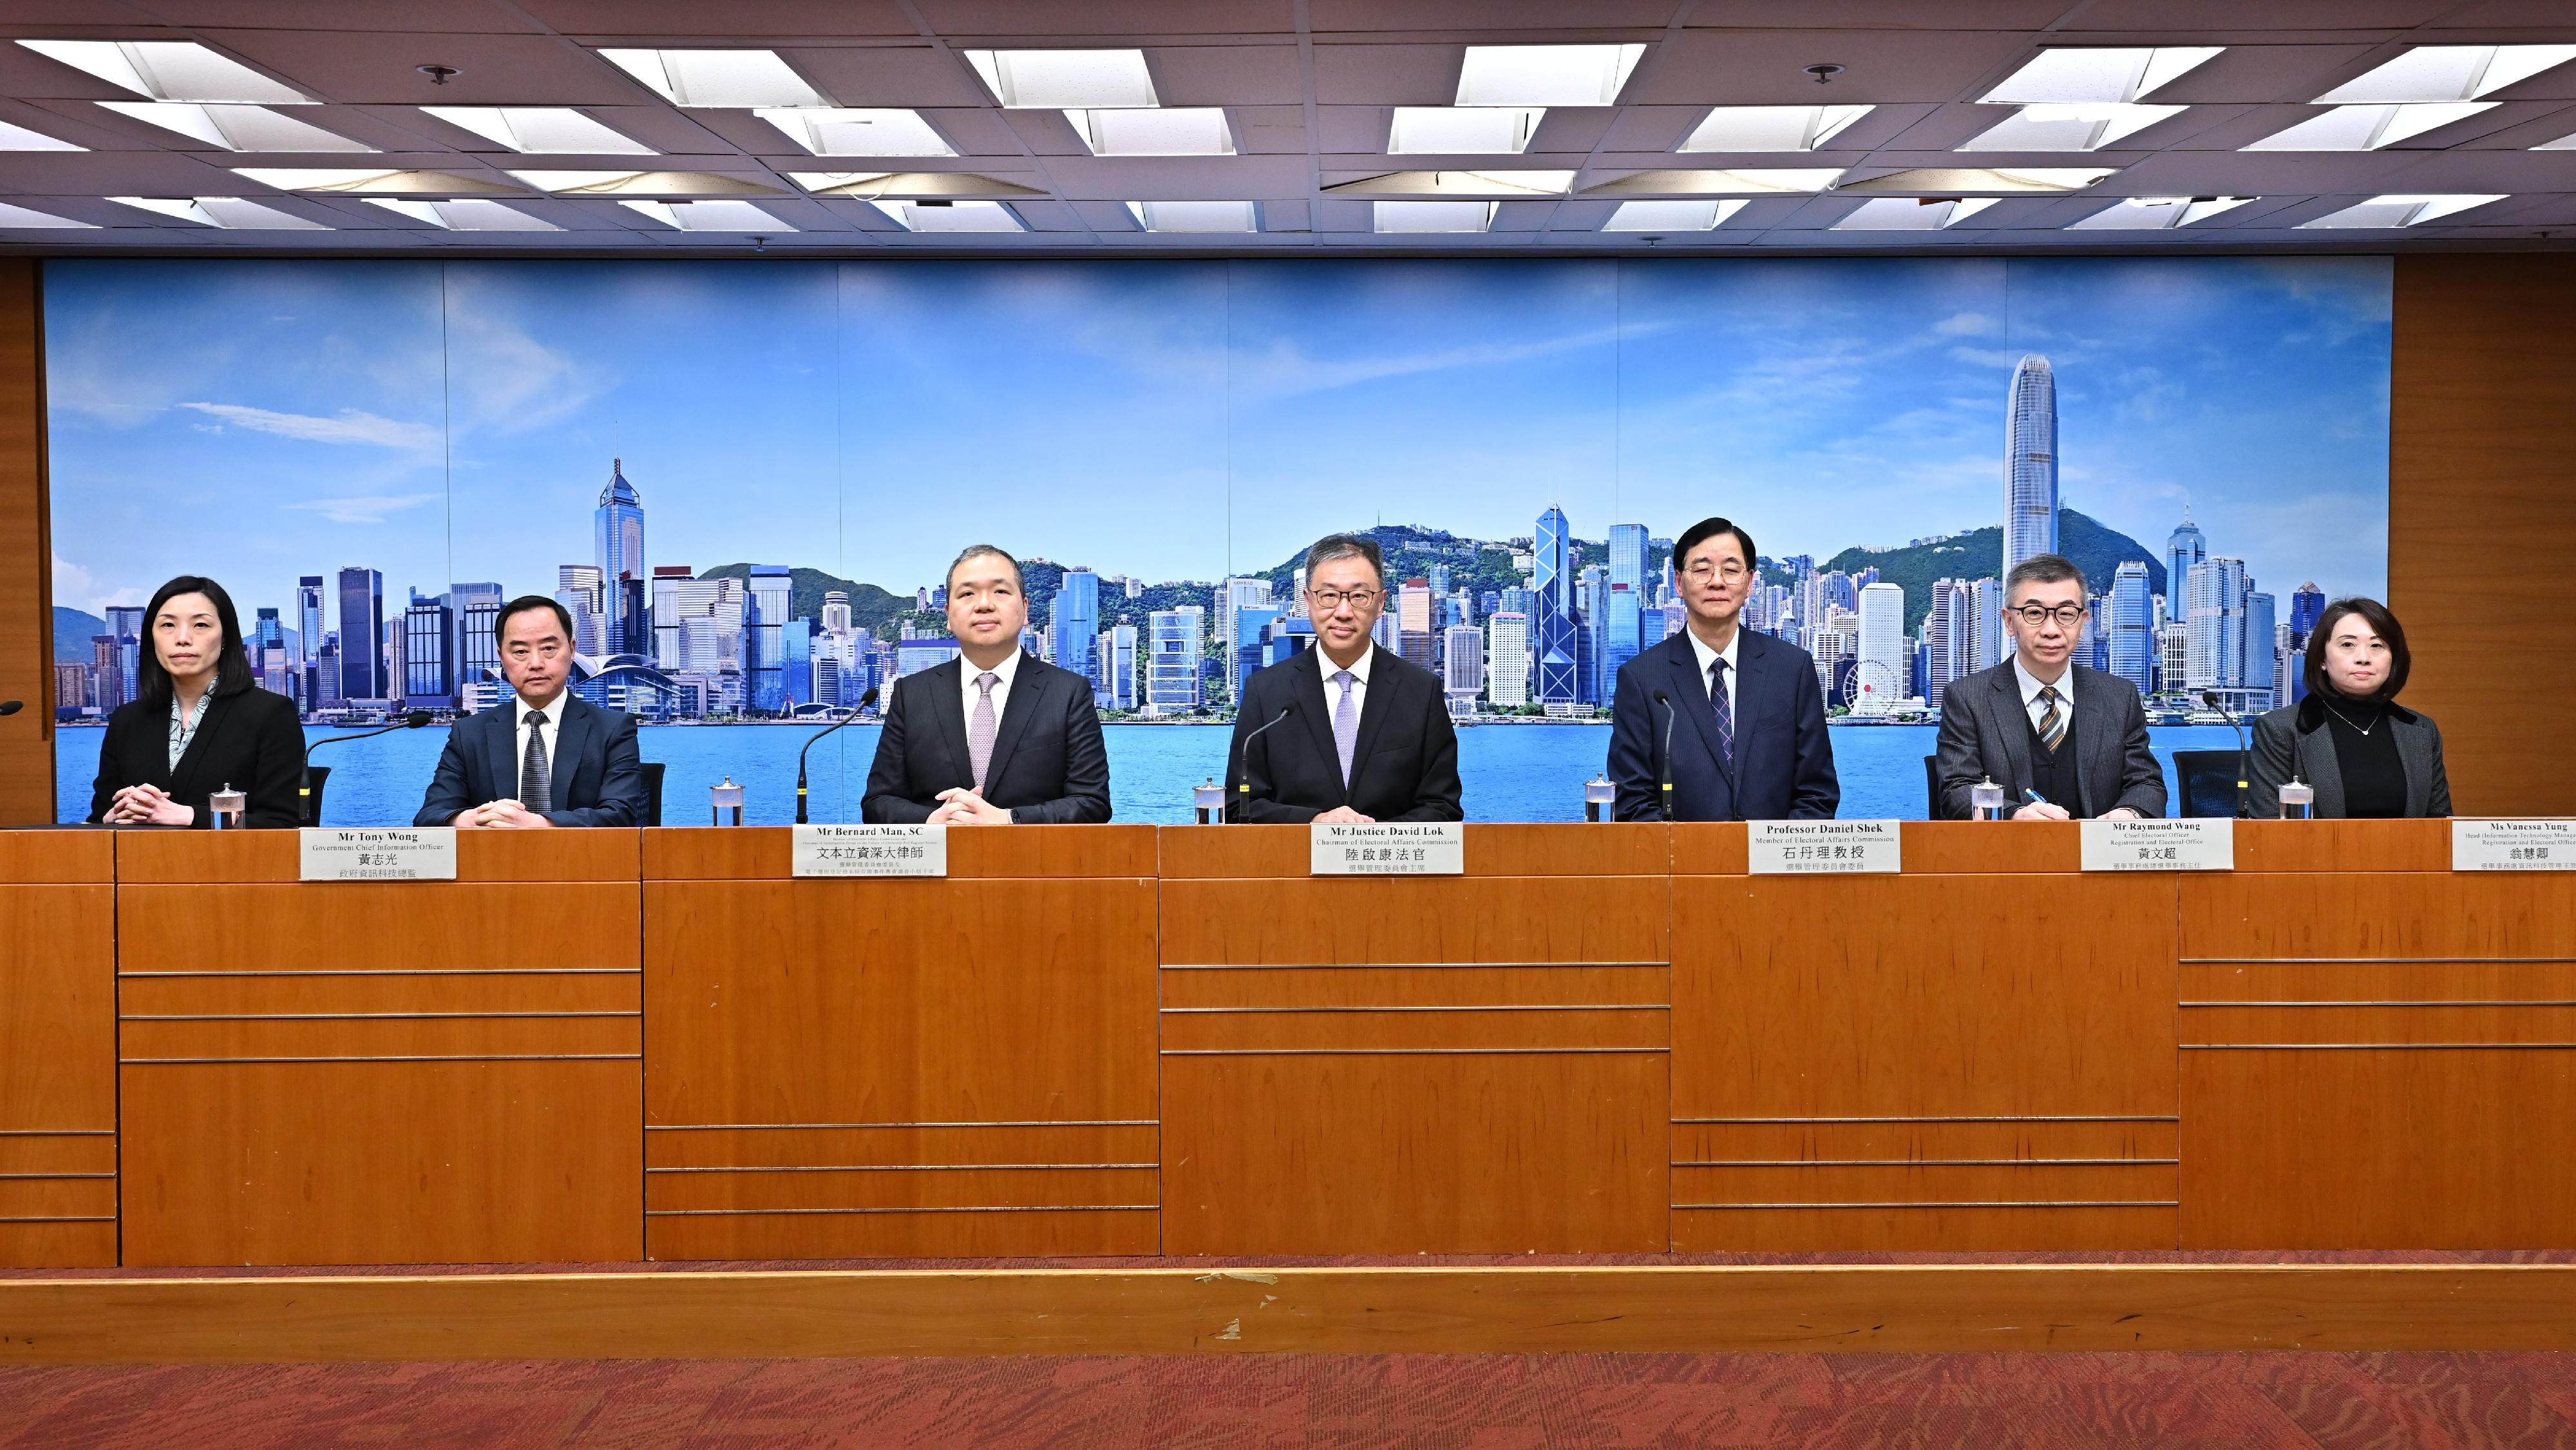 The Chairman of the Electoral Affairs Commission (EAC), Mr Justice David Lok, today (January 26) hosted a press conference to explain the findings of the investigation into the failure of the Electronic Poll Register system in the 2023 District Council Ordinary Election. Photo shows (from left) the Chief Superintendent of the Cyber Security and Technology Crime Bureau of the Hong Kong Police Force, Ms Kelly Cheng; the Government Chief Information Officer, Mr Tony Wong; EAC member and Chairman of the Investigation Group on the Failure of Electronic Poll Register System, Mr Bernard Man, SC; Mr Justice Lok; EAC member Professor Daniel Shek; the Chief Electoral Officer of the Registration and Electoral Office, Mr Raymond Wang; and the Head (Information Technology Management) of the Registration and Electoral Office, Ms Vanessa Yung.